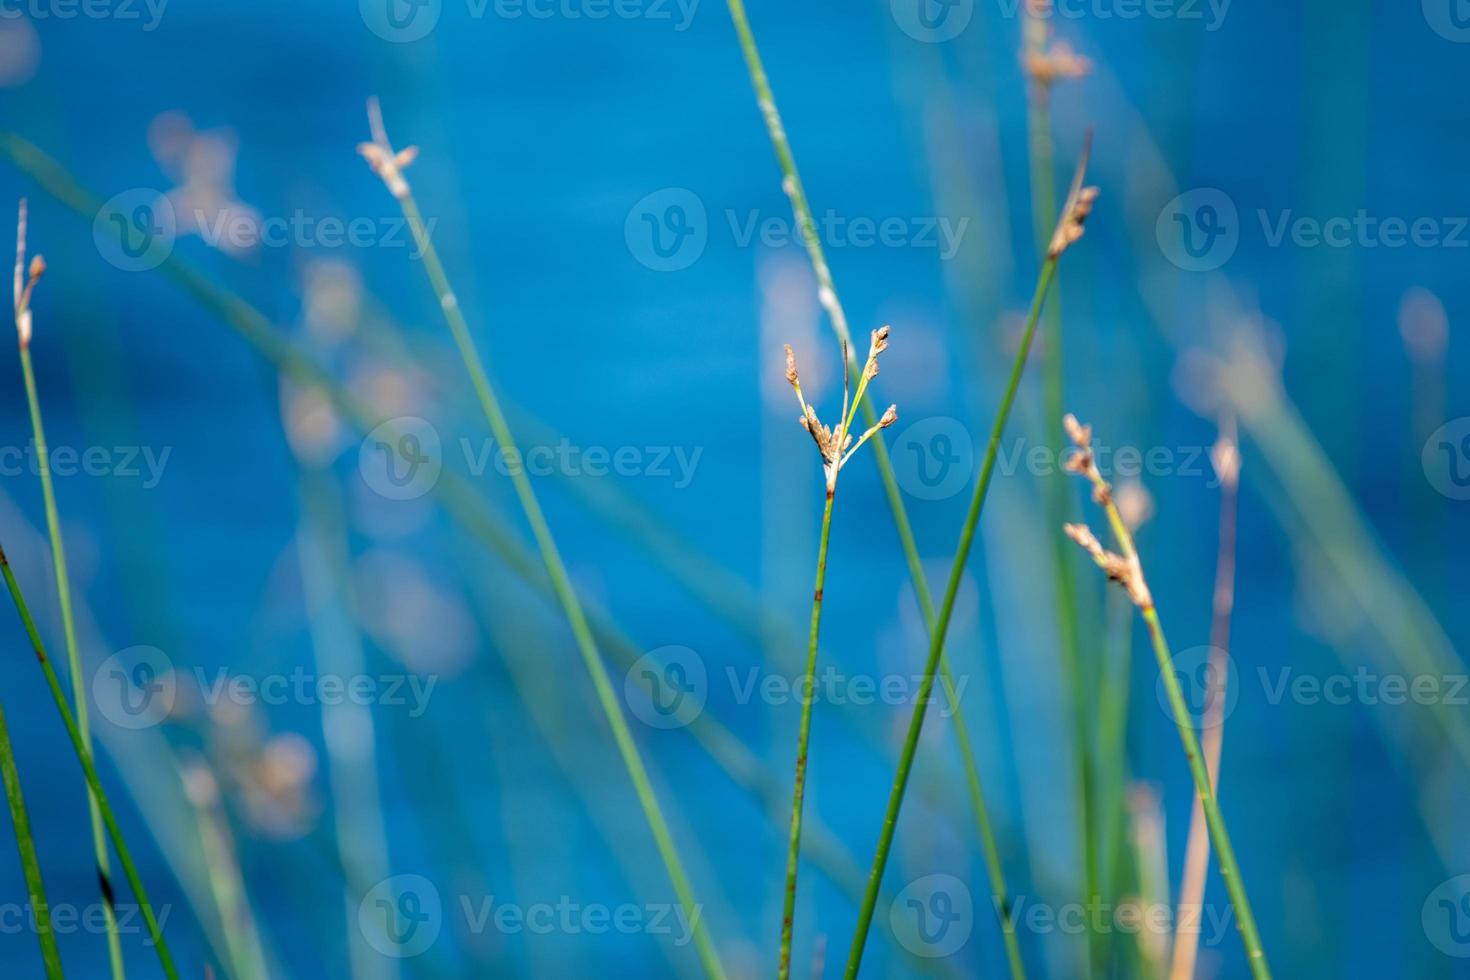 abstract green plants by remote lake photo